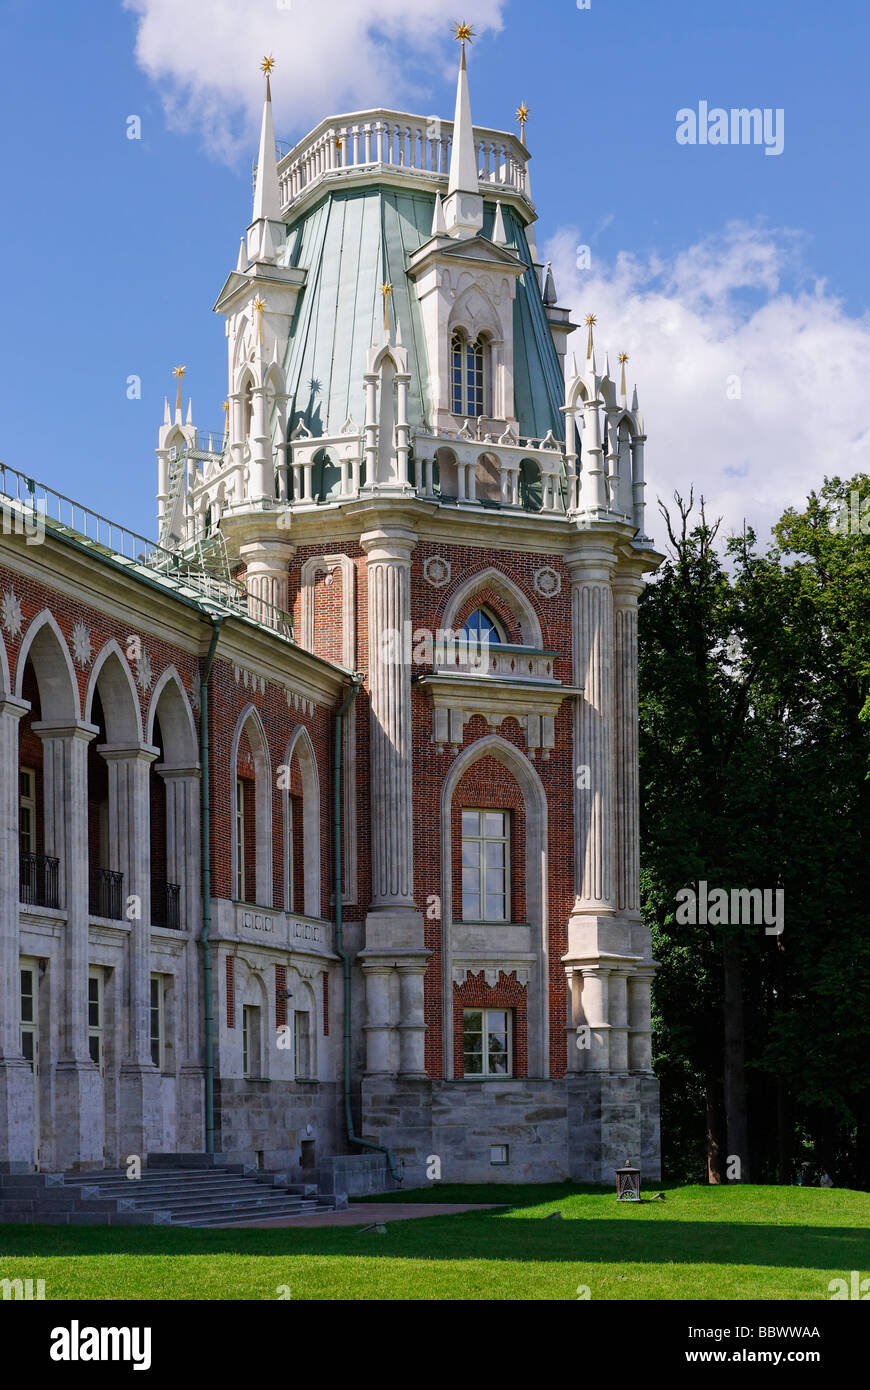 The Grand Palace in Tsaritsyno estate, Moscow, Russia Stock Photo